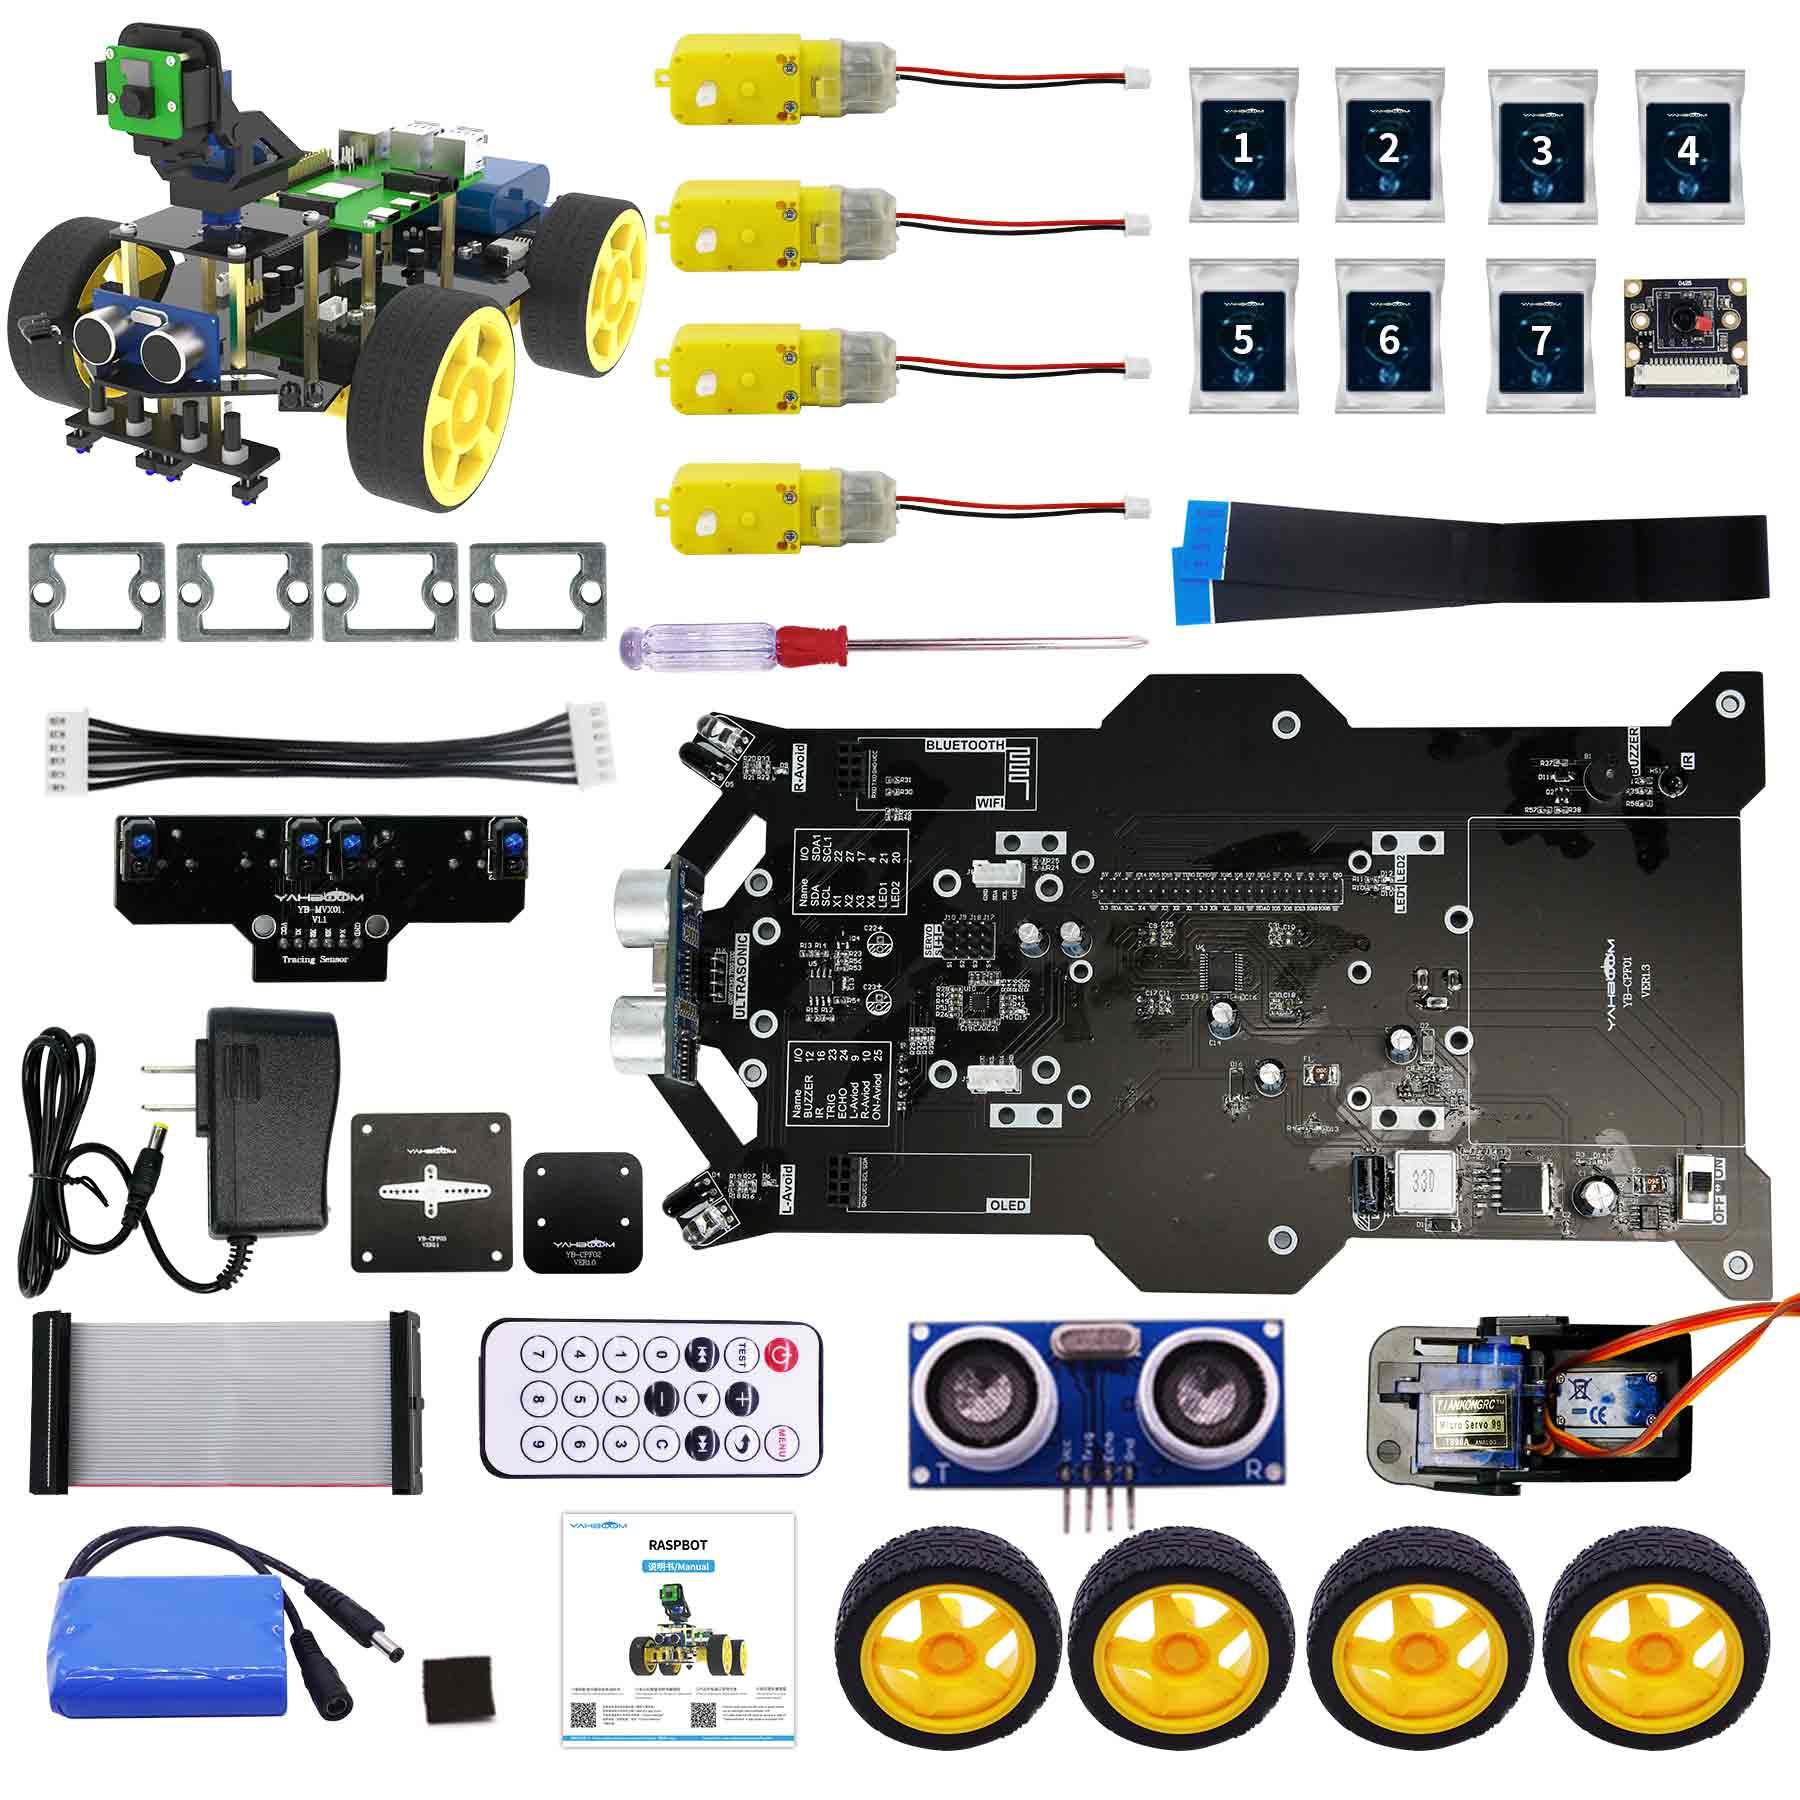 Yahboom Raspbot AI Vision STEM Education Robot Car with FPV Camera for Raspberry Pi 4B